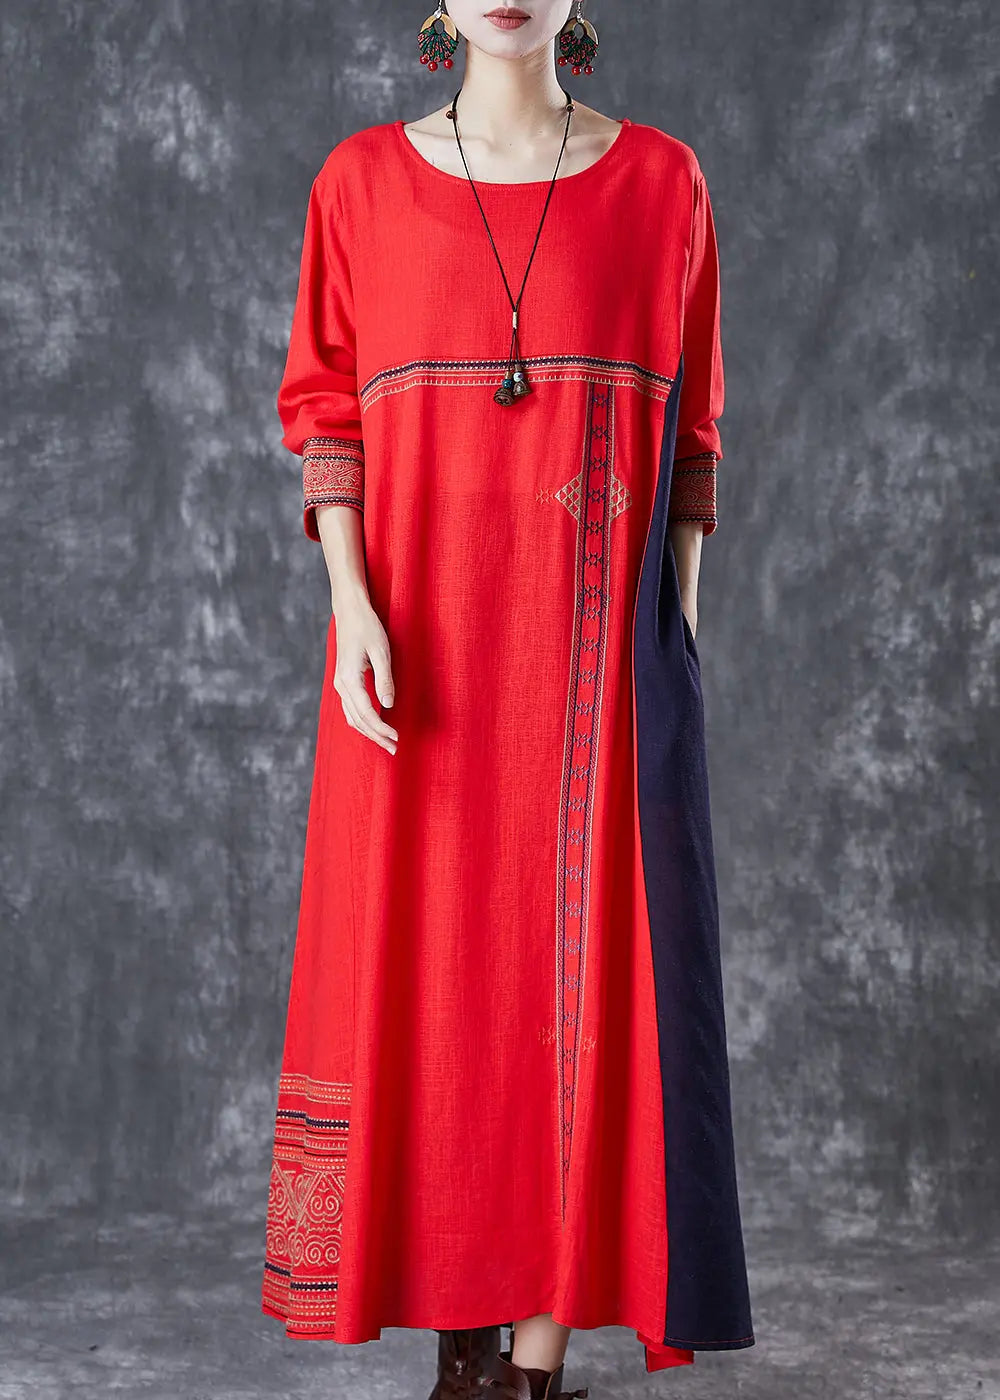 Red Patchwork Linen Maxi Dresses Embroidered Spring Ada Fashion